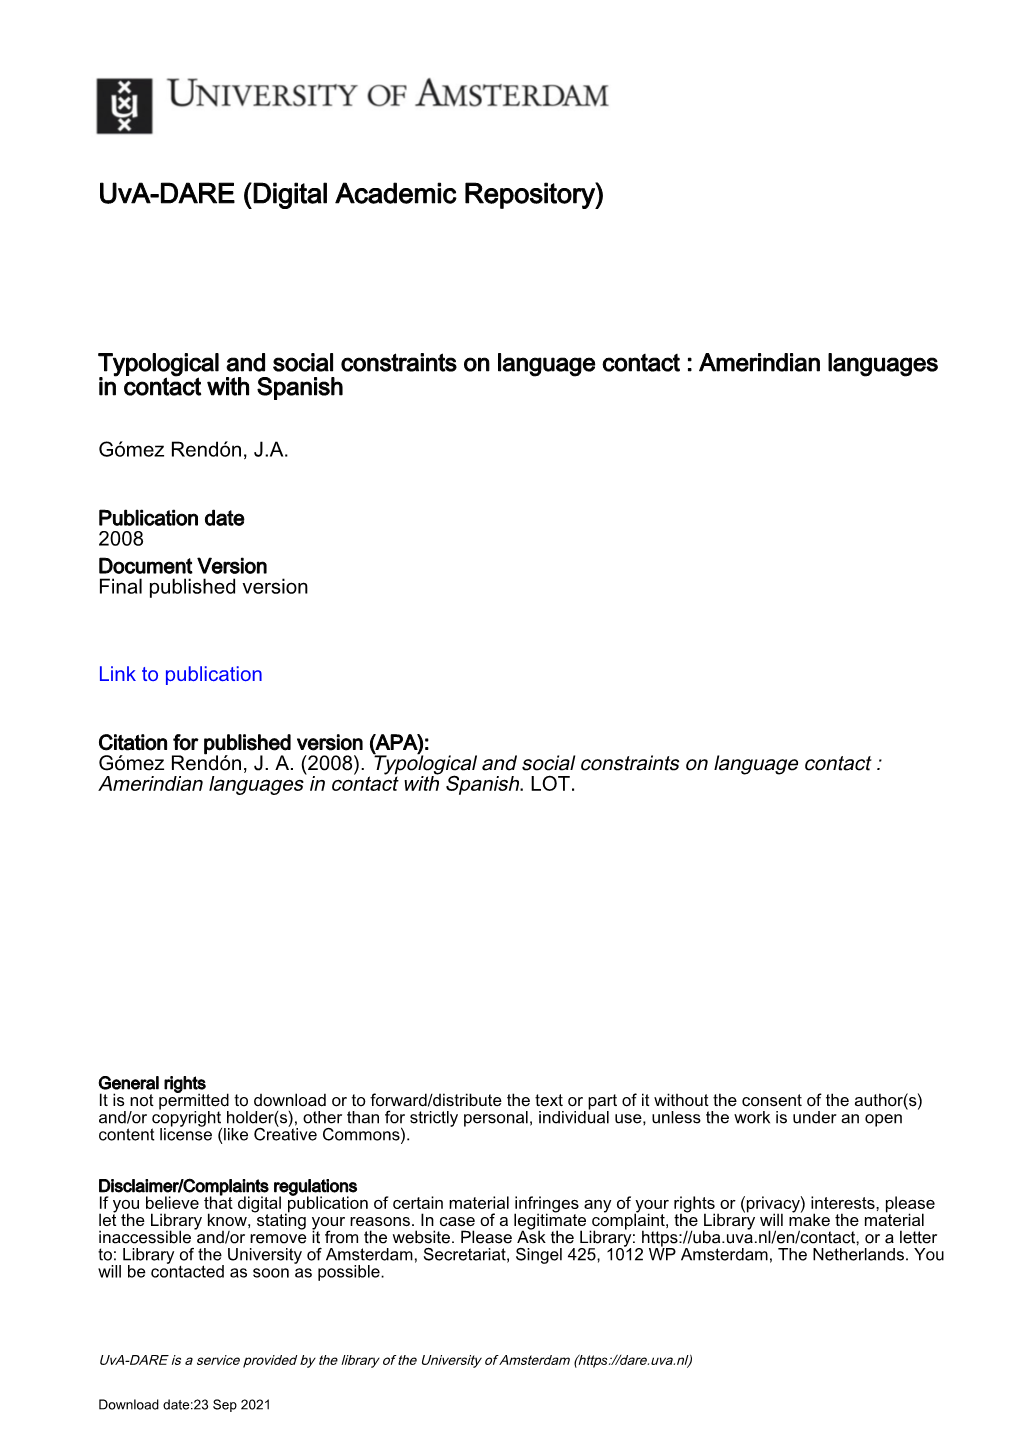 Typological and Social Constraints on Language Contact : Amerindian Languages in Contact with Spanish